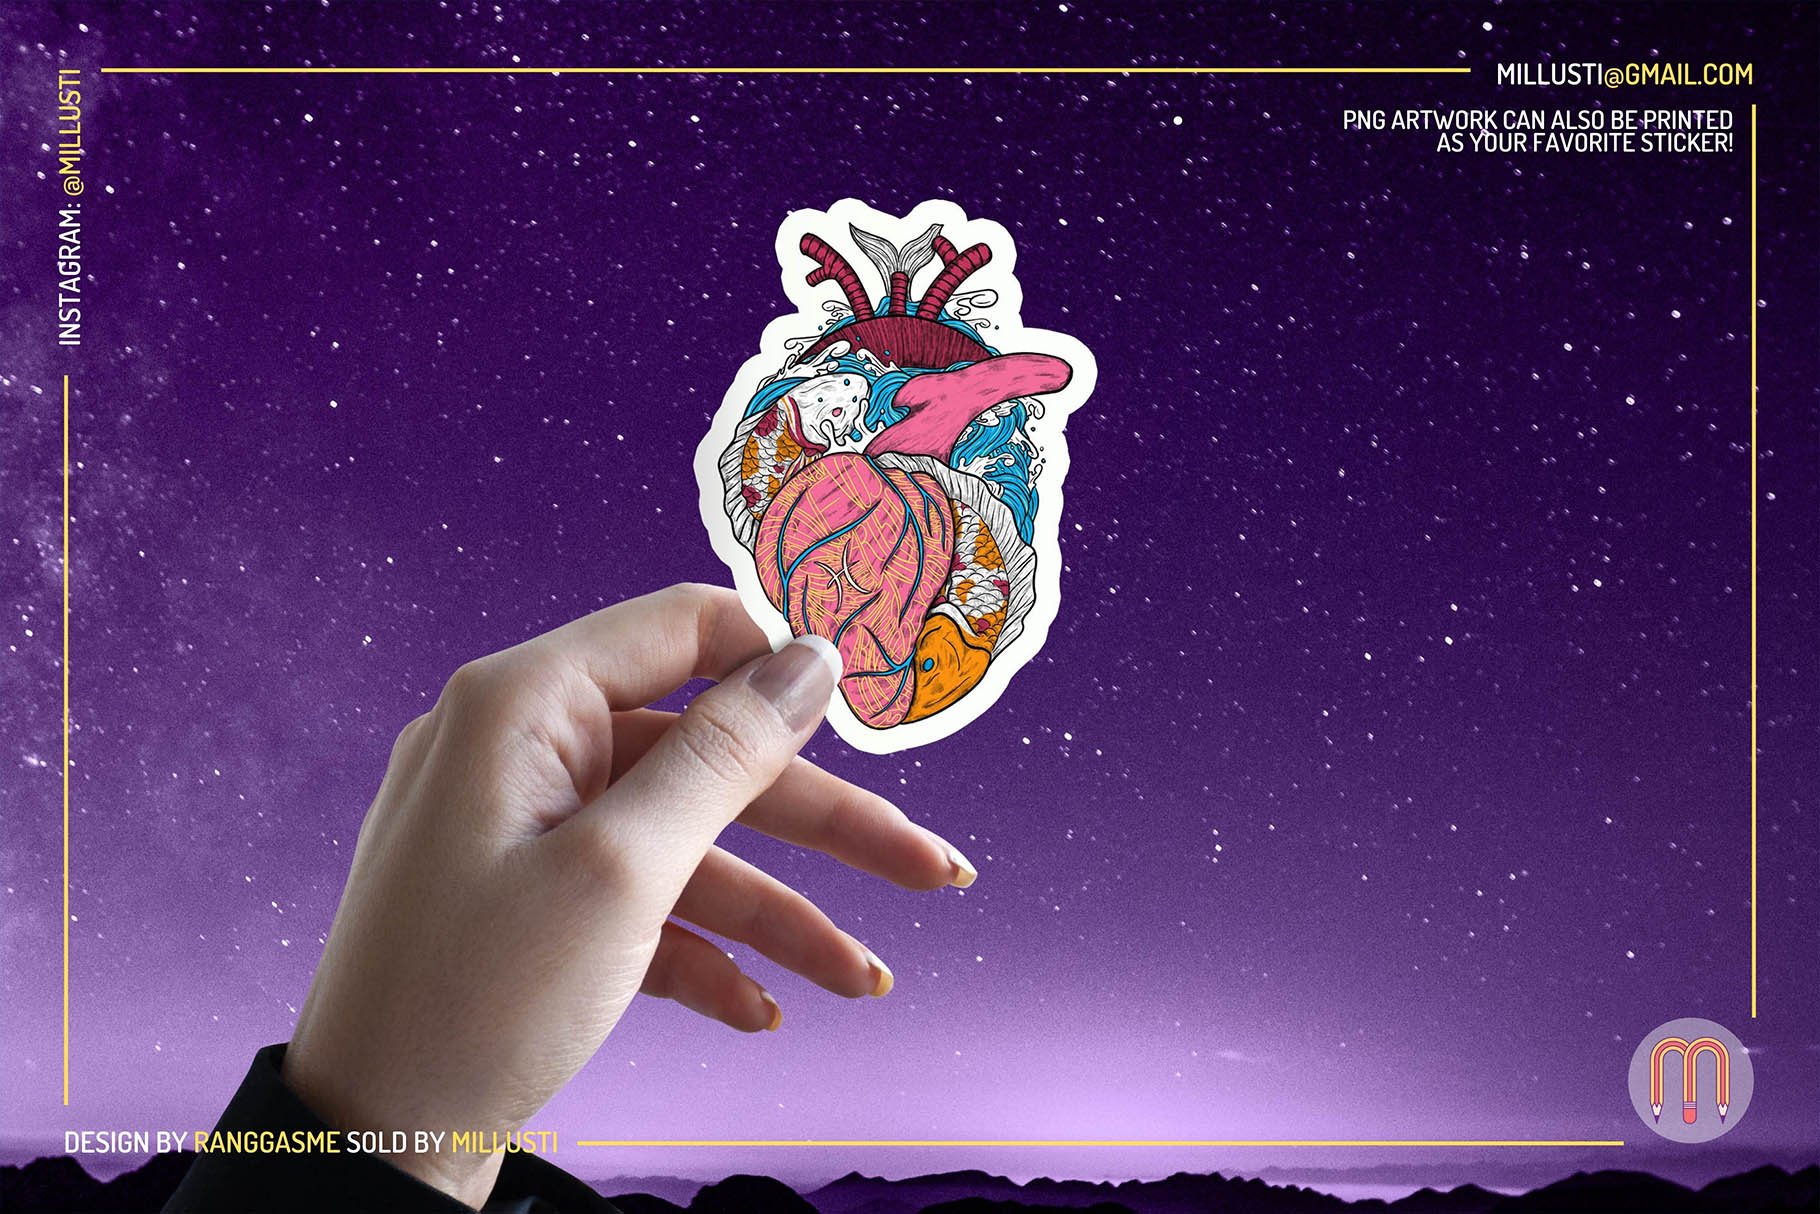 Use this astrology heart design for the stickers.